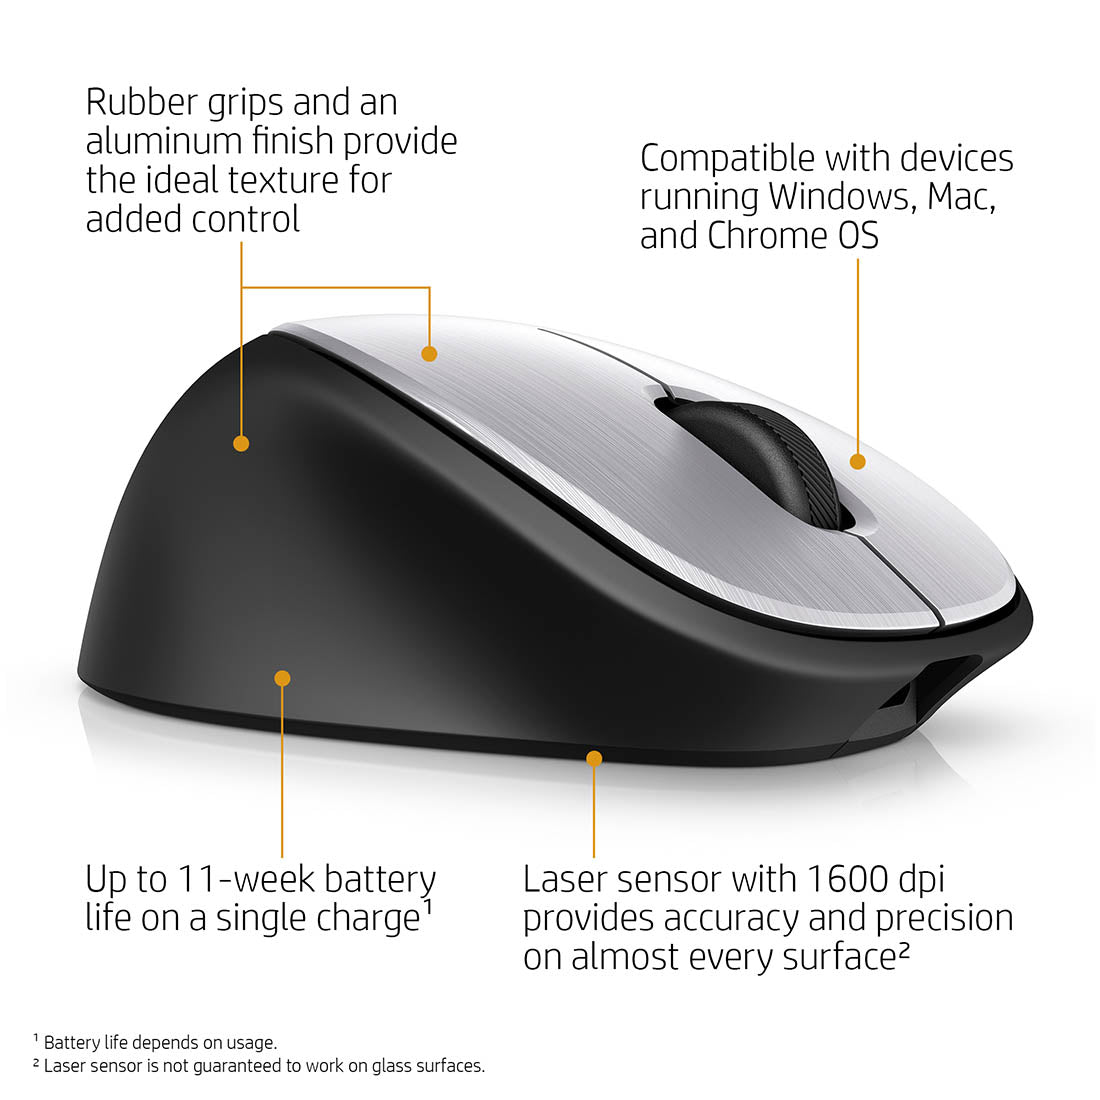 HP Envy 500 Rechargeable Wireless Mouse with Power Backup up to 11 Weeks